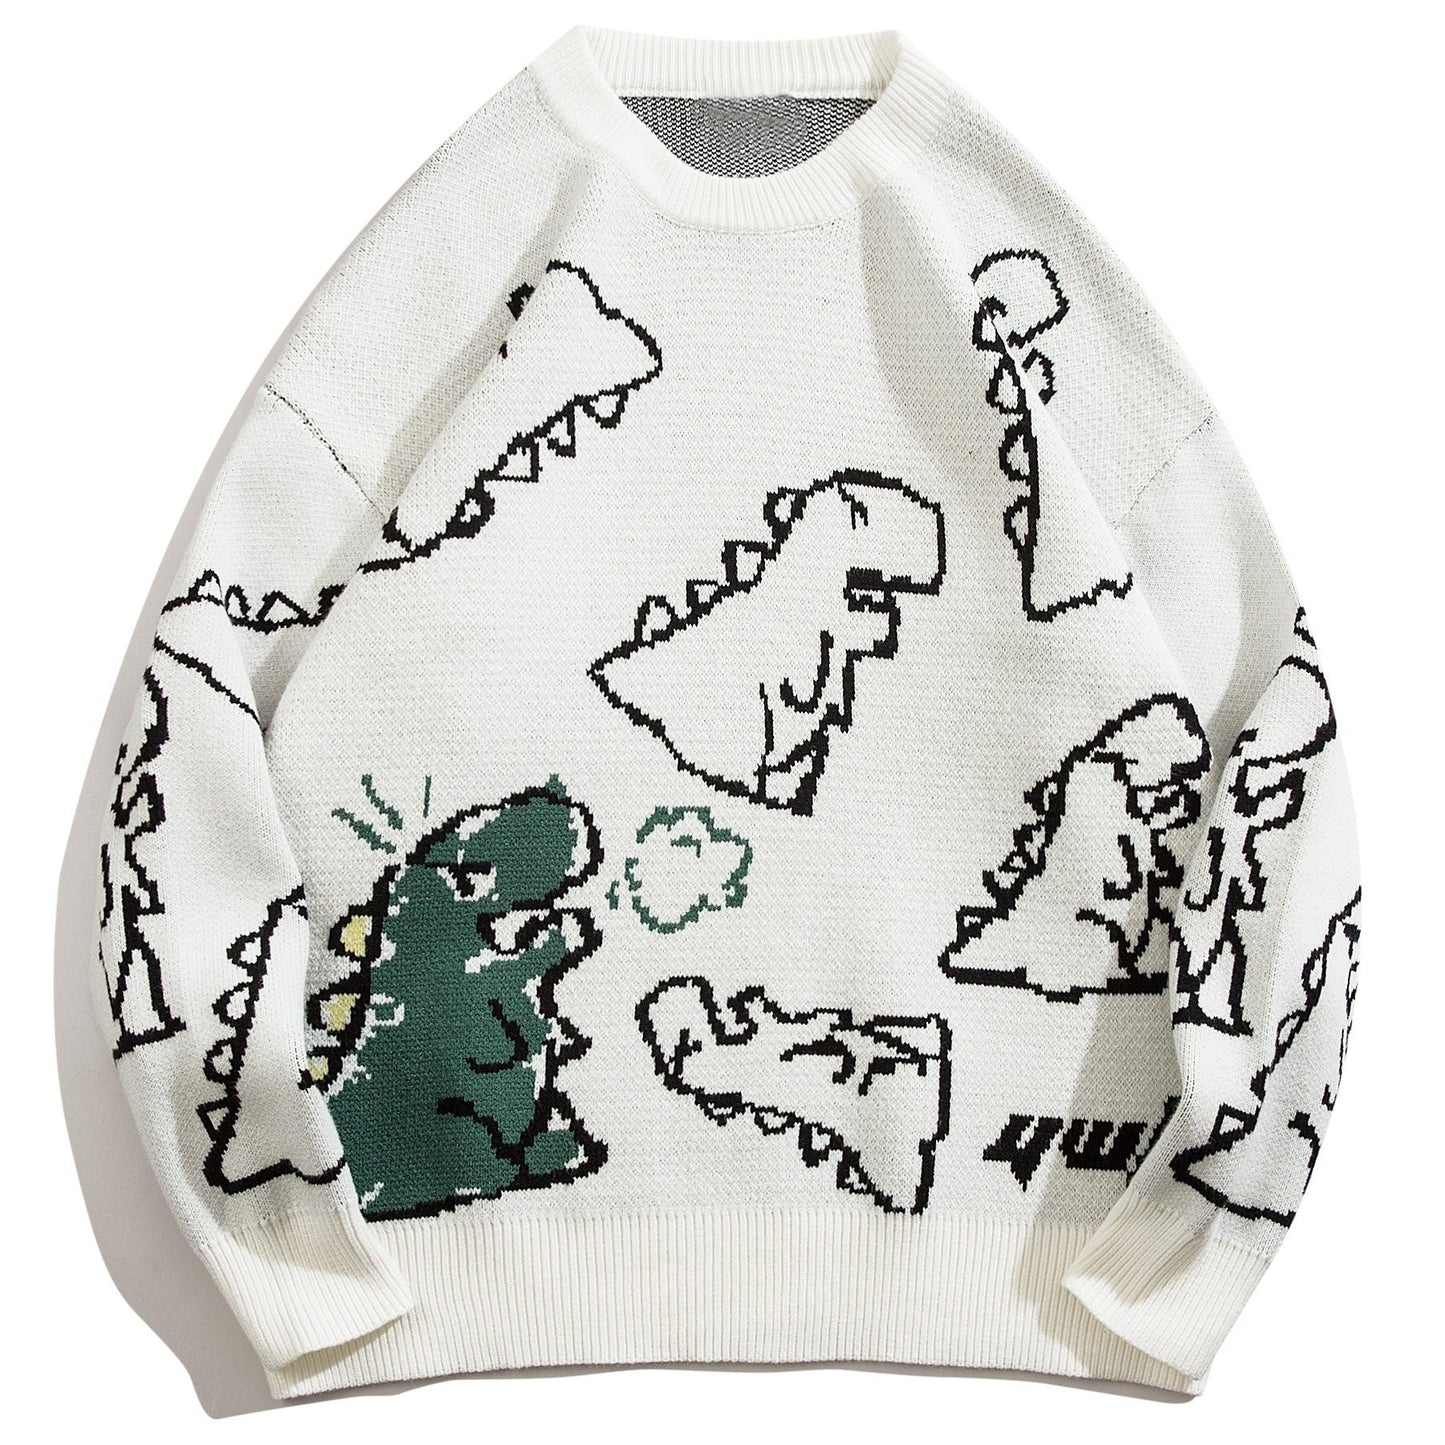 Foruwish - Cute Cartoon Dinosaur Pattern Knitted Sweater, Men's Casual Warm Slightly Stretch Round Neck Pullover Sweater For Fall Winter